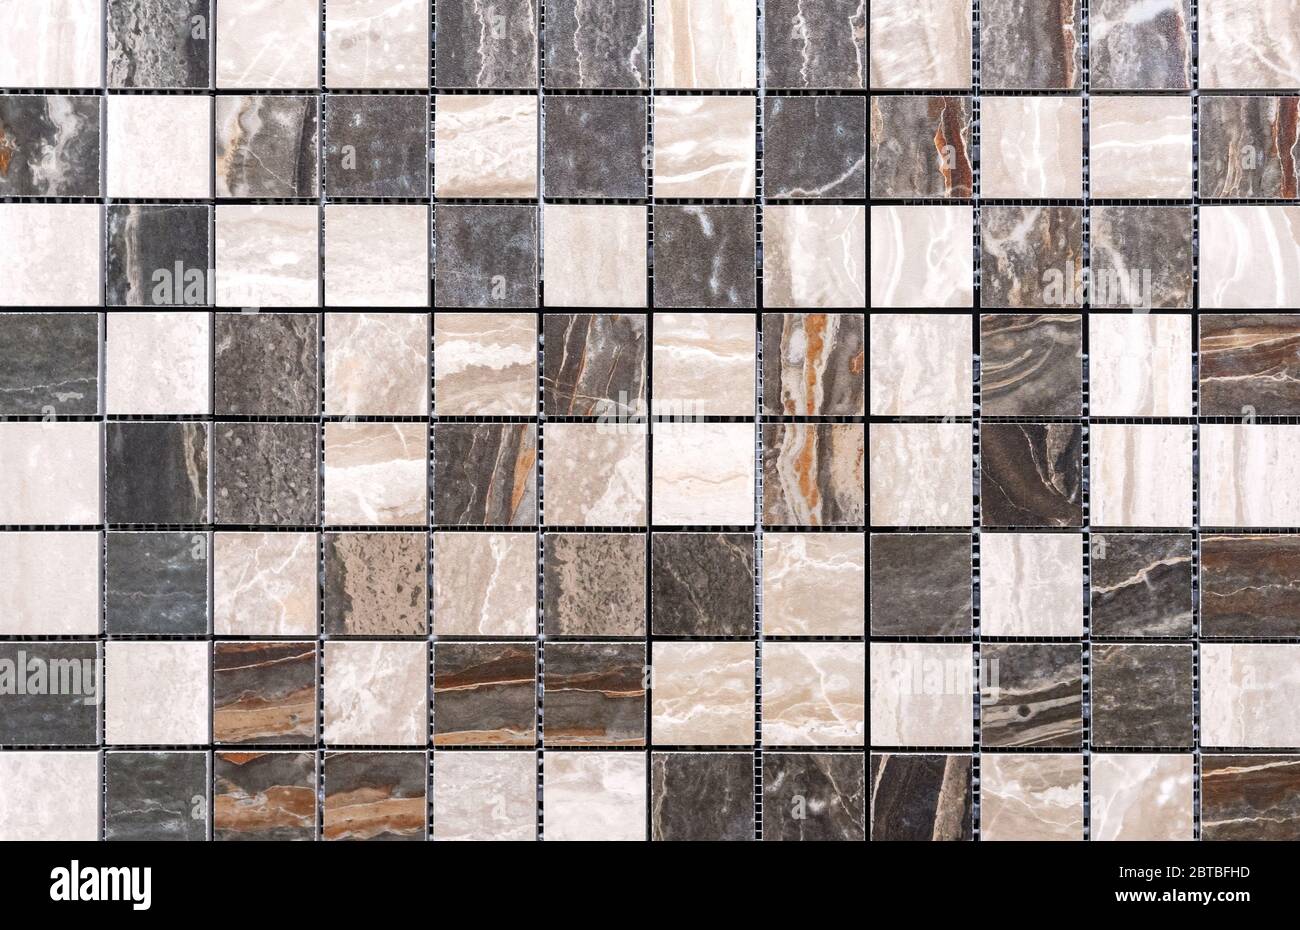 Ceramic Mosaic Tiles With Gray And Beige Squares Made Of Natural Quartz To Decorate The Kitchen Bathroom Or Pool Stock Photo Alamy